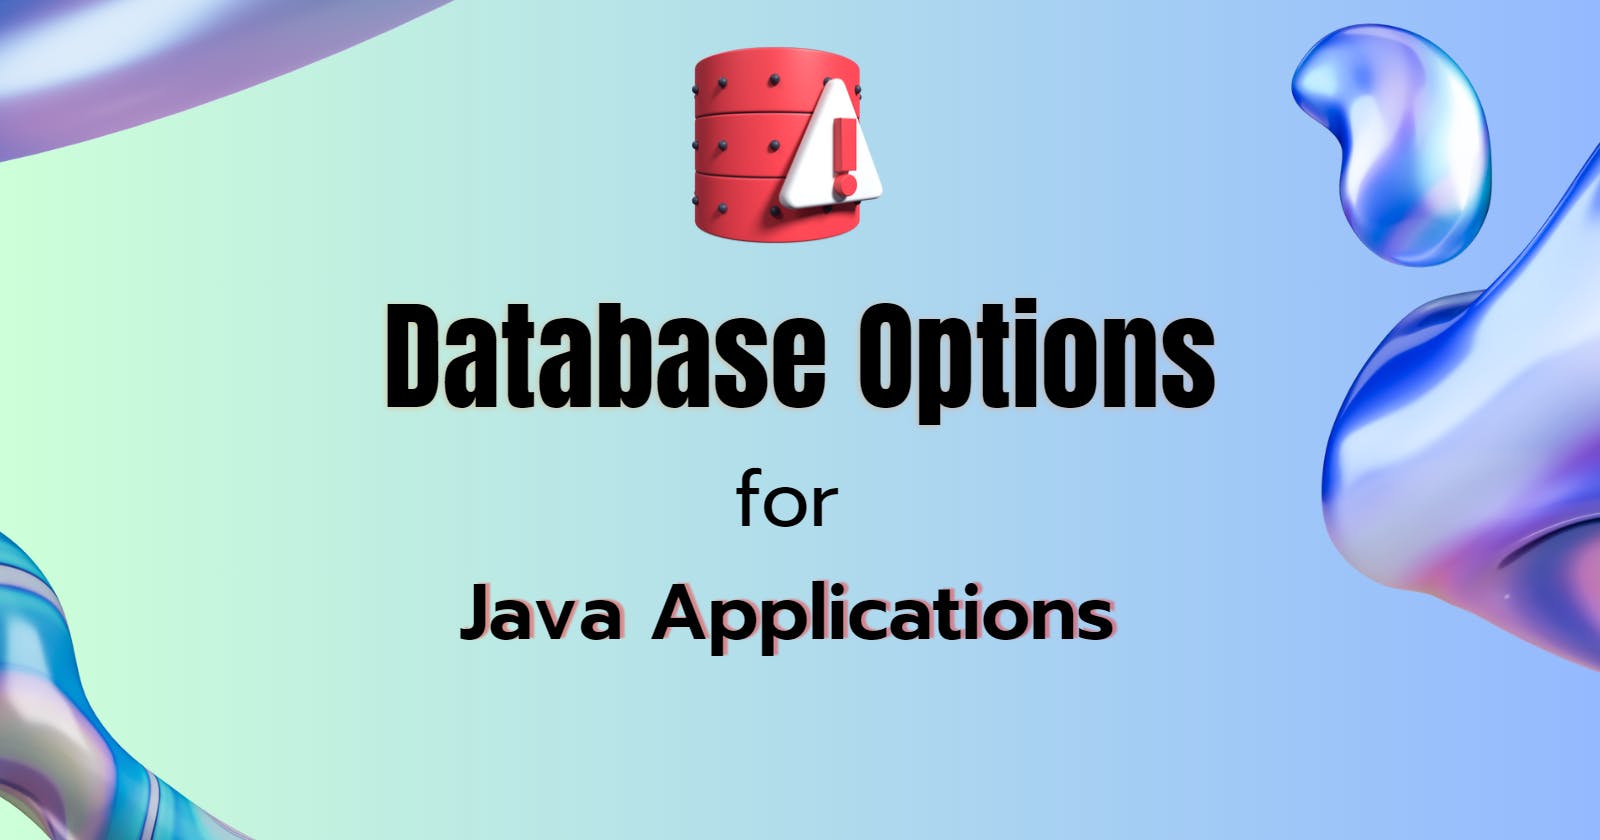 Exploring Database Options for Java Applications